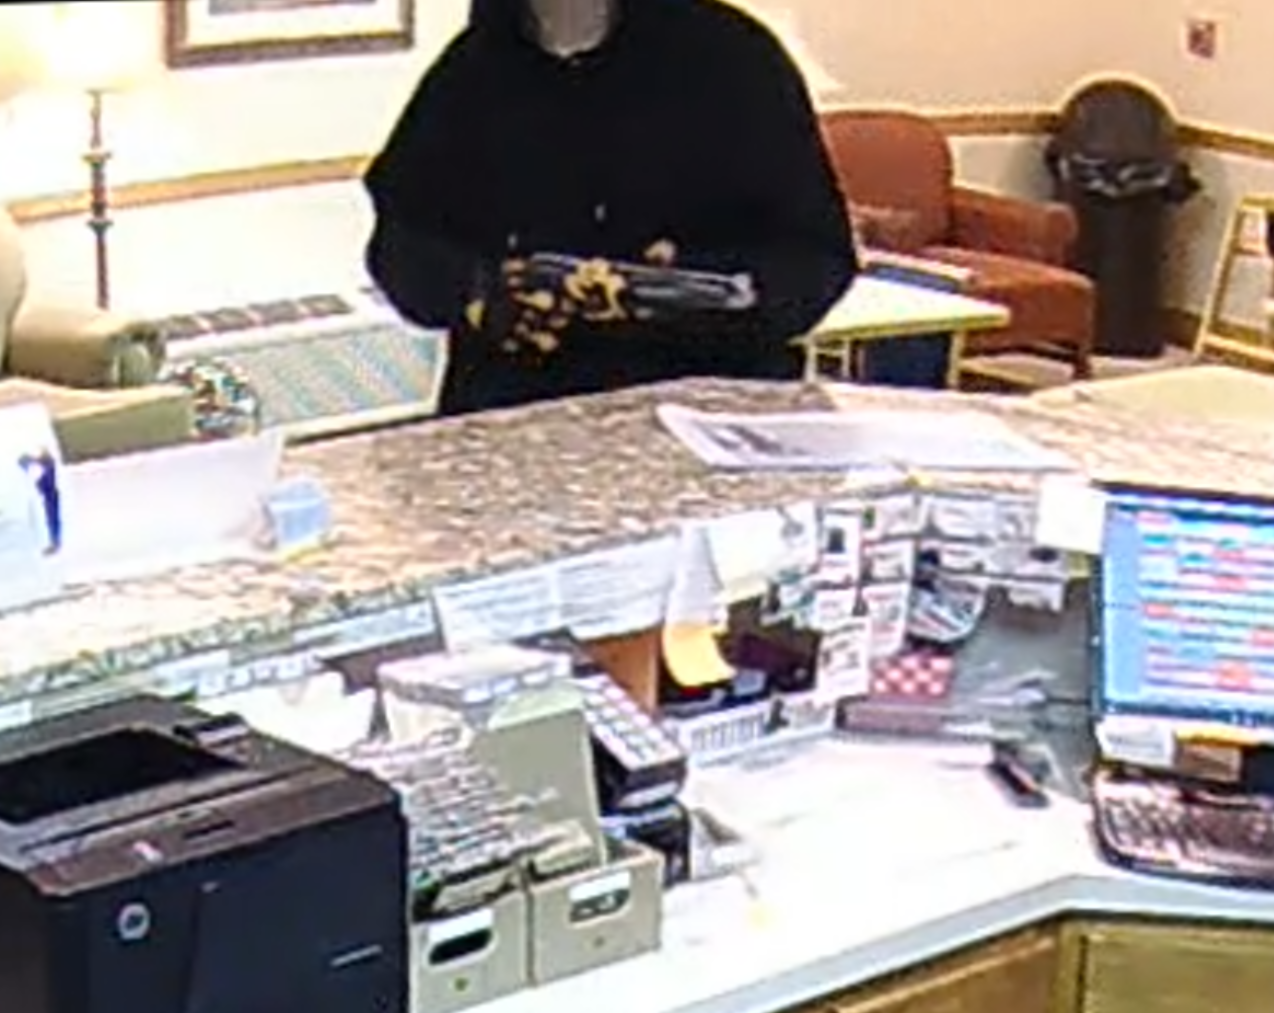 Image 4 of alleged suspect in robbery investigation.